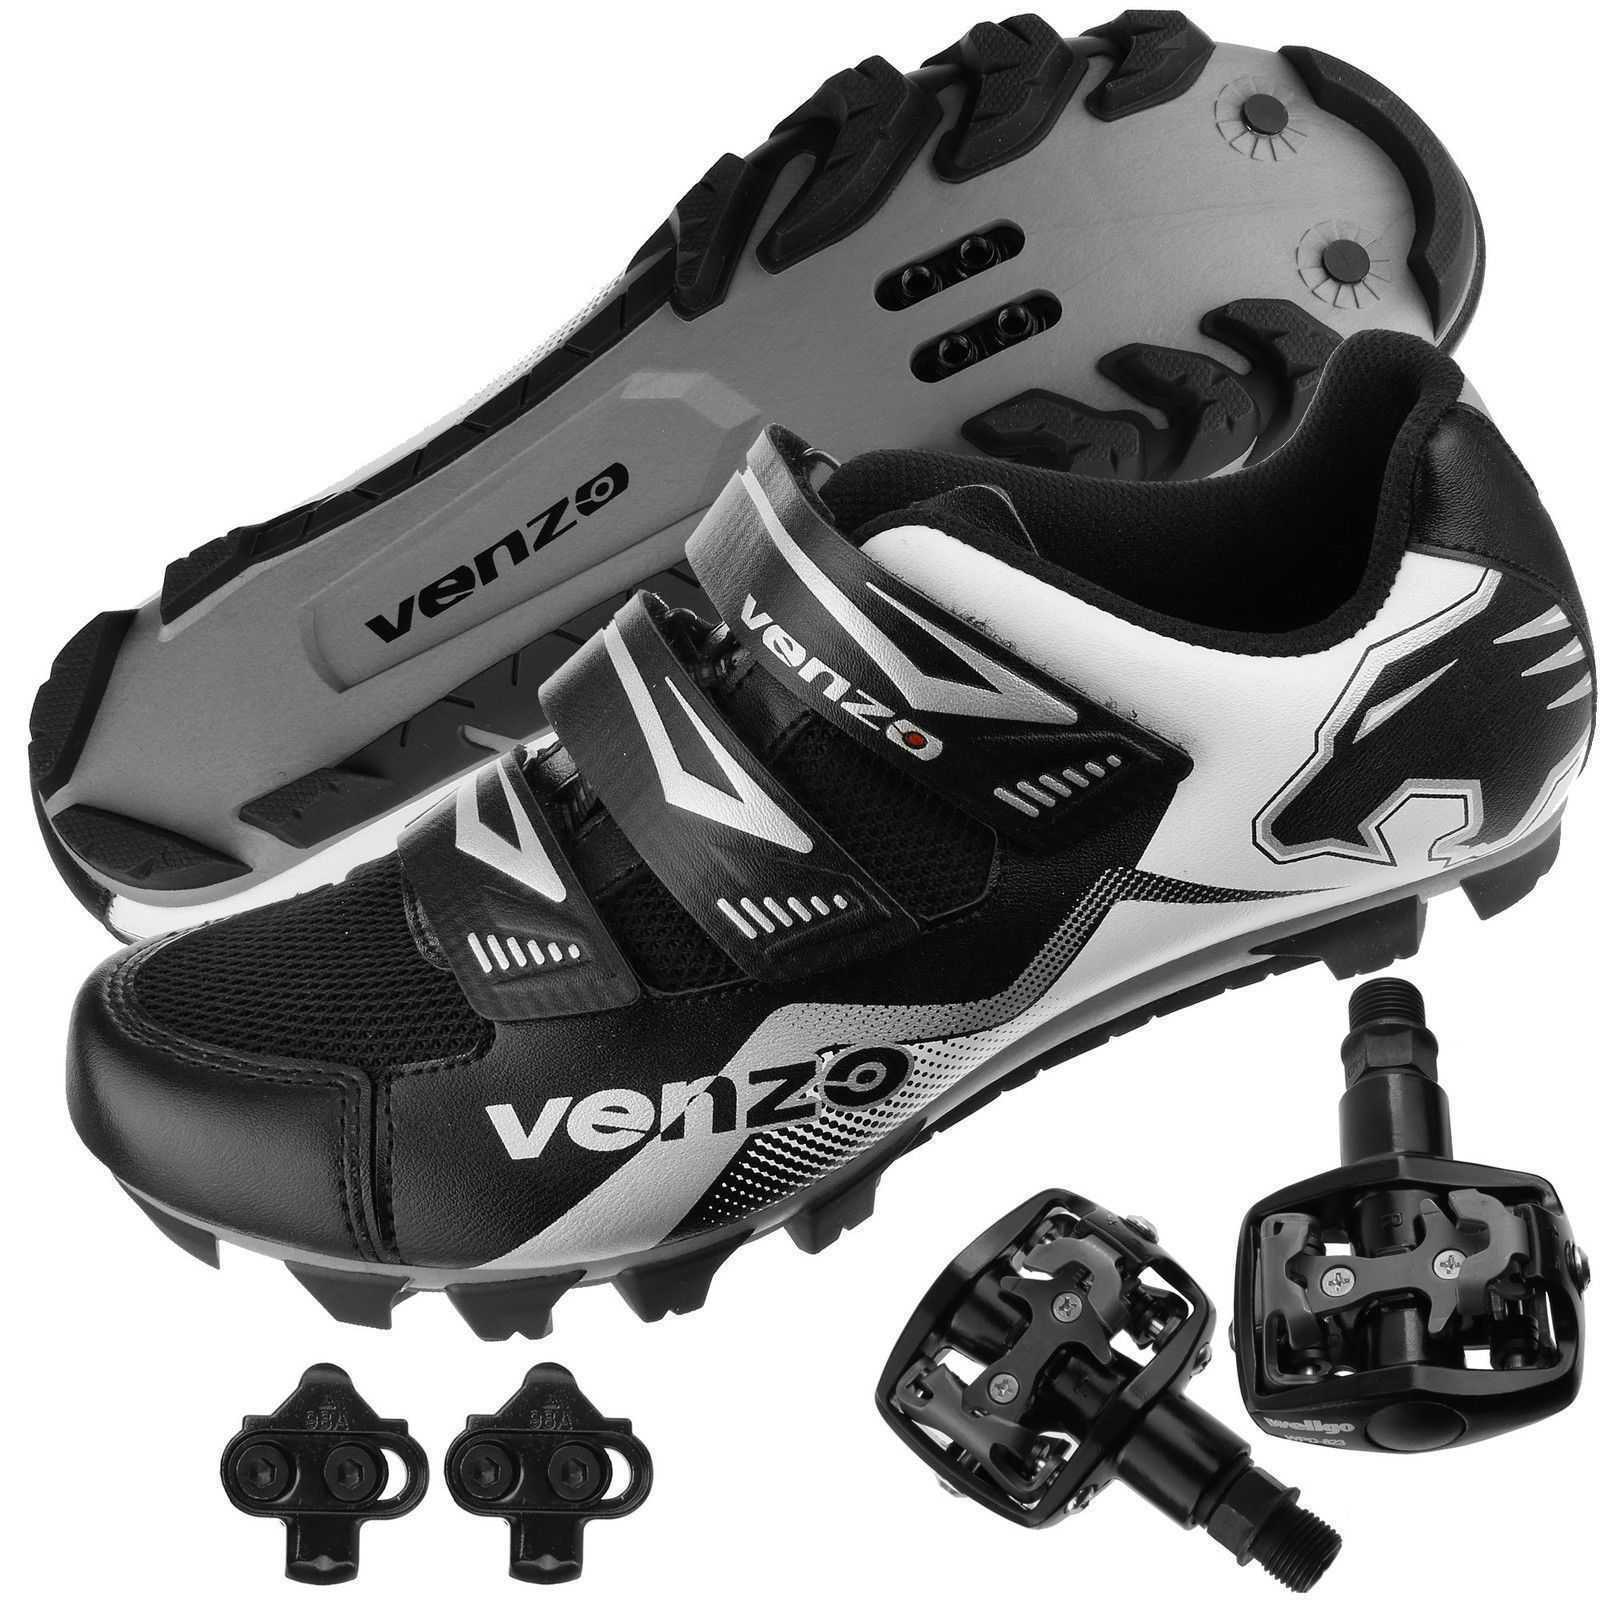 Venzo Mountain Mens Bike Bicycle Cycling Shoes Multi-Use Pedals & Cleats Compatible with Shimano SPD Cleats Off Road and MTB Buckle Strap Good for Spin Cycle